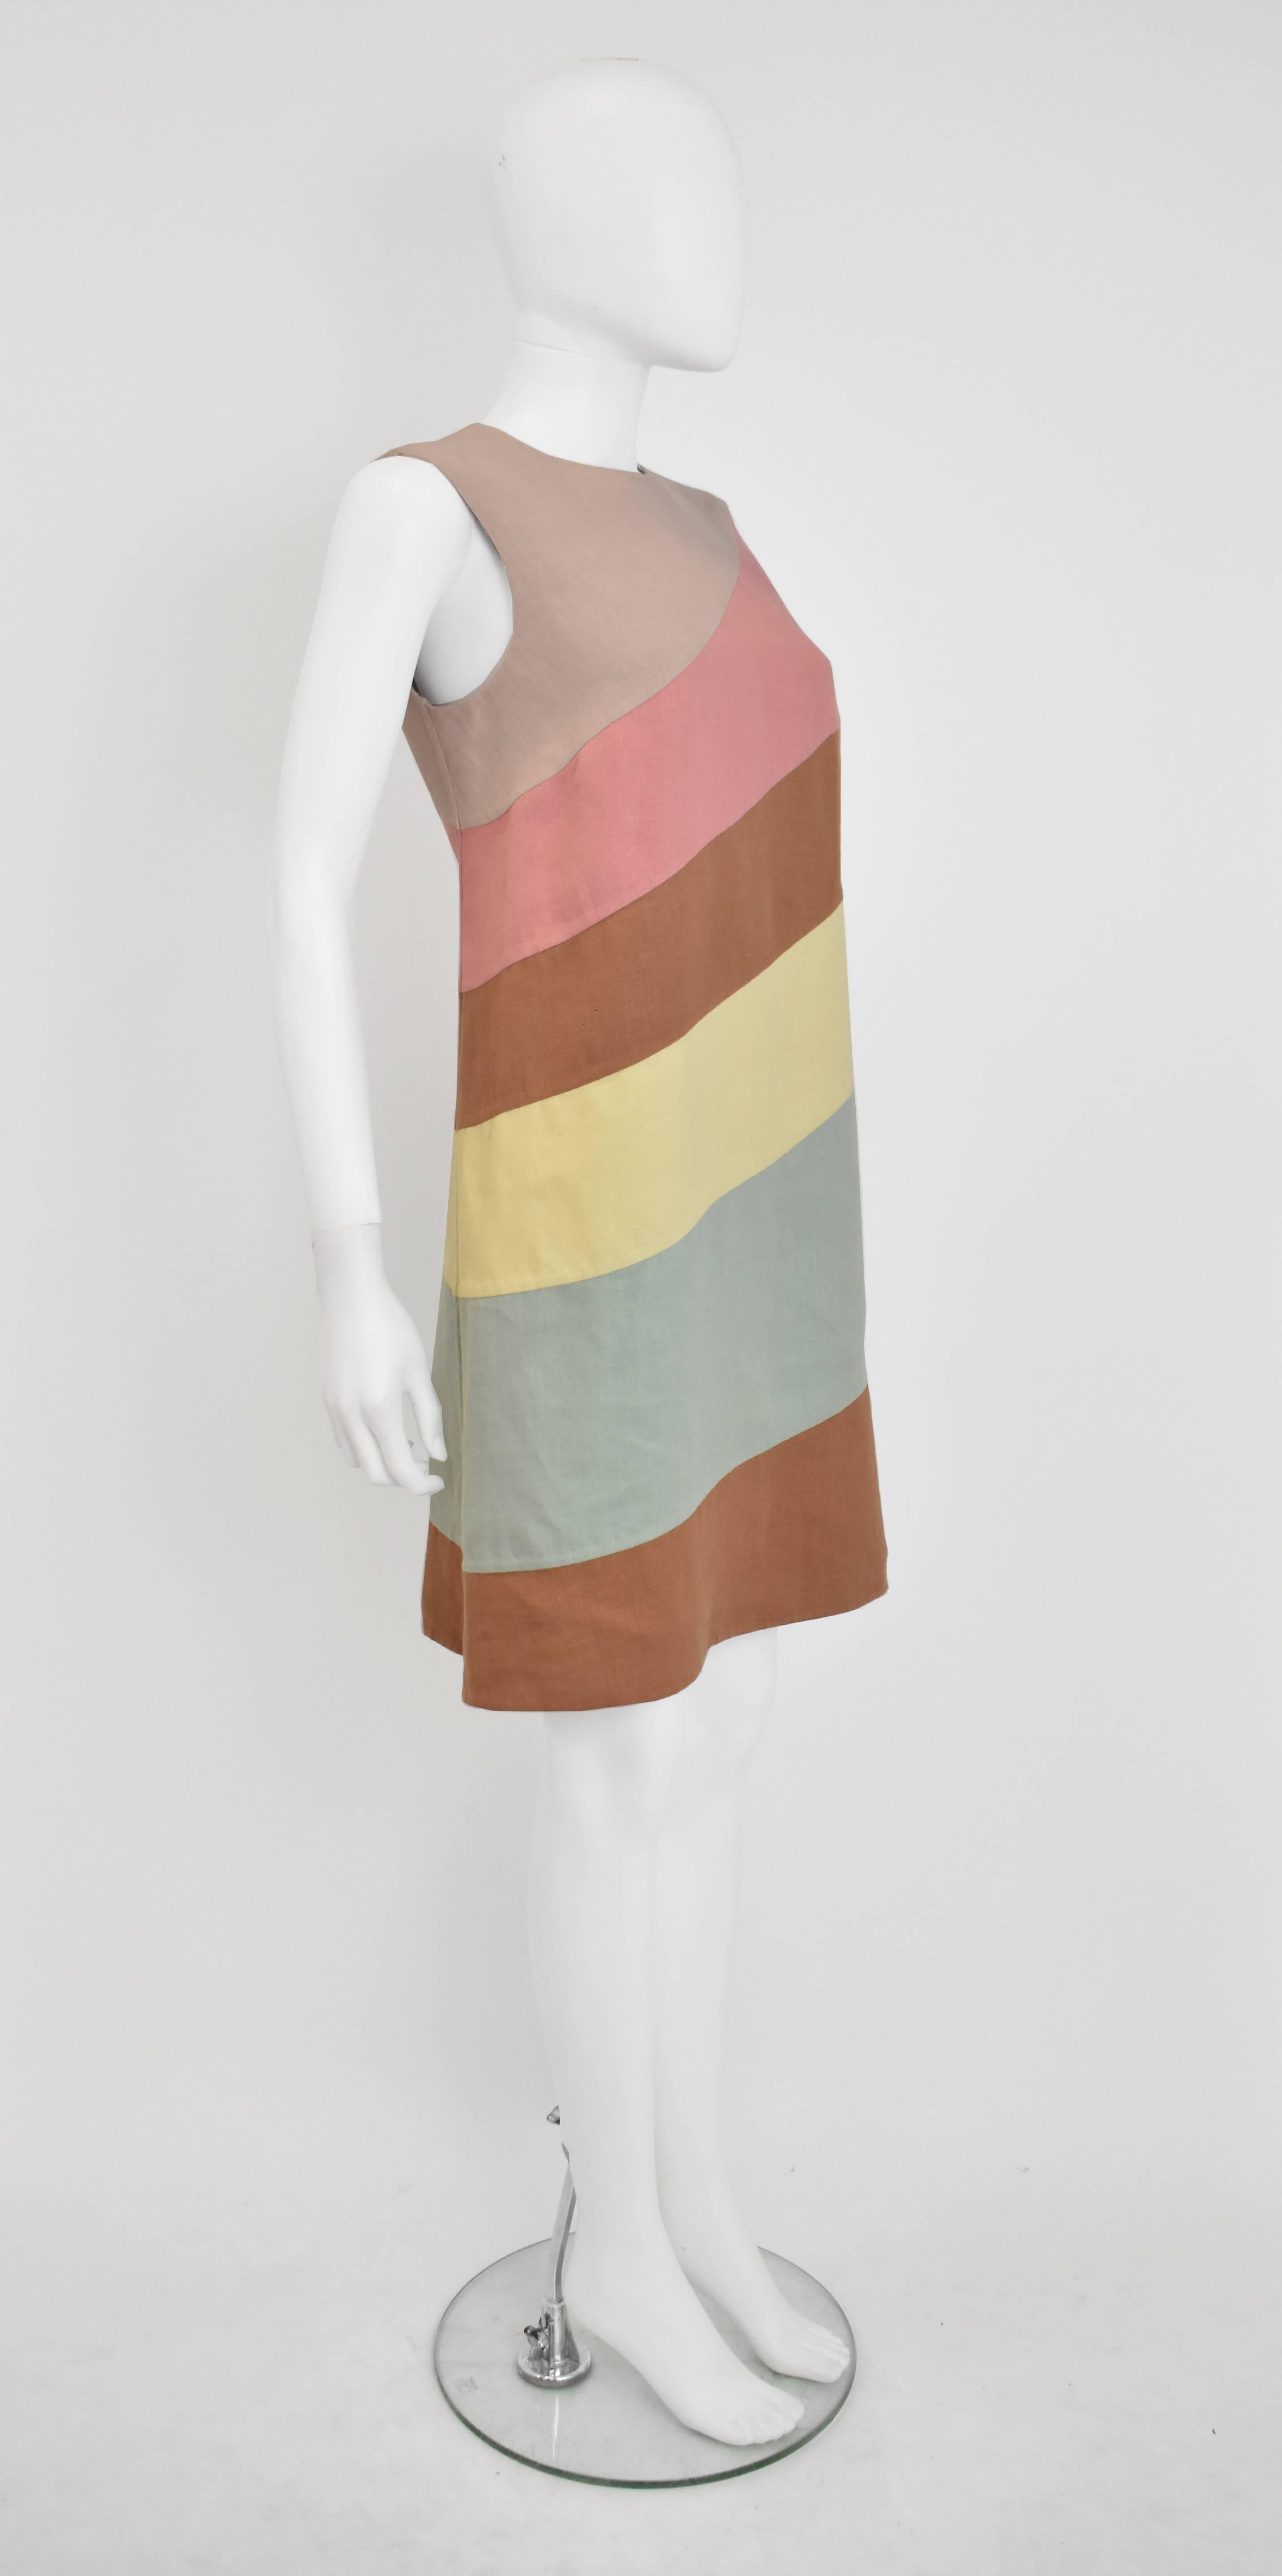 A light and Summery linen dress by Valentino. The dress has a simple, sleeveless, A-line shift shape that falls just above the knees. The dress is made from concentric layers of pastel coloured linen in diagonal stripes. It is in excellent condition